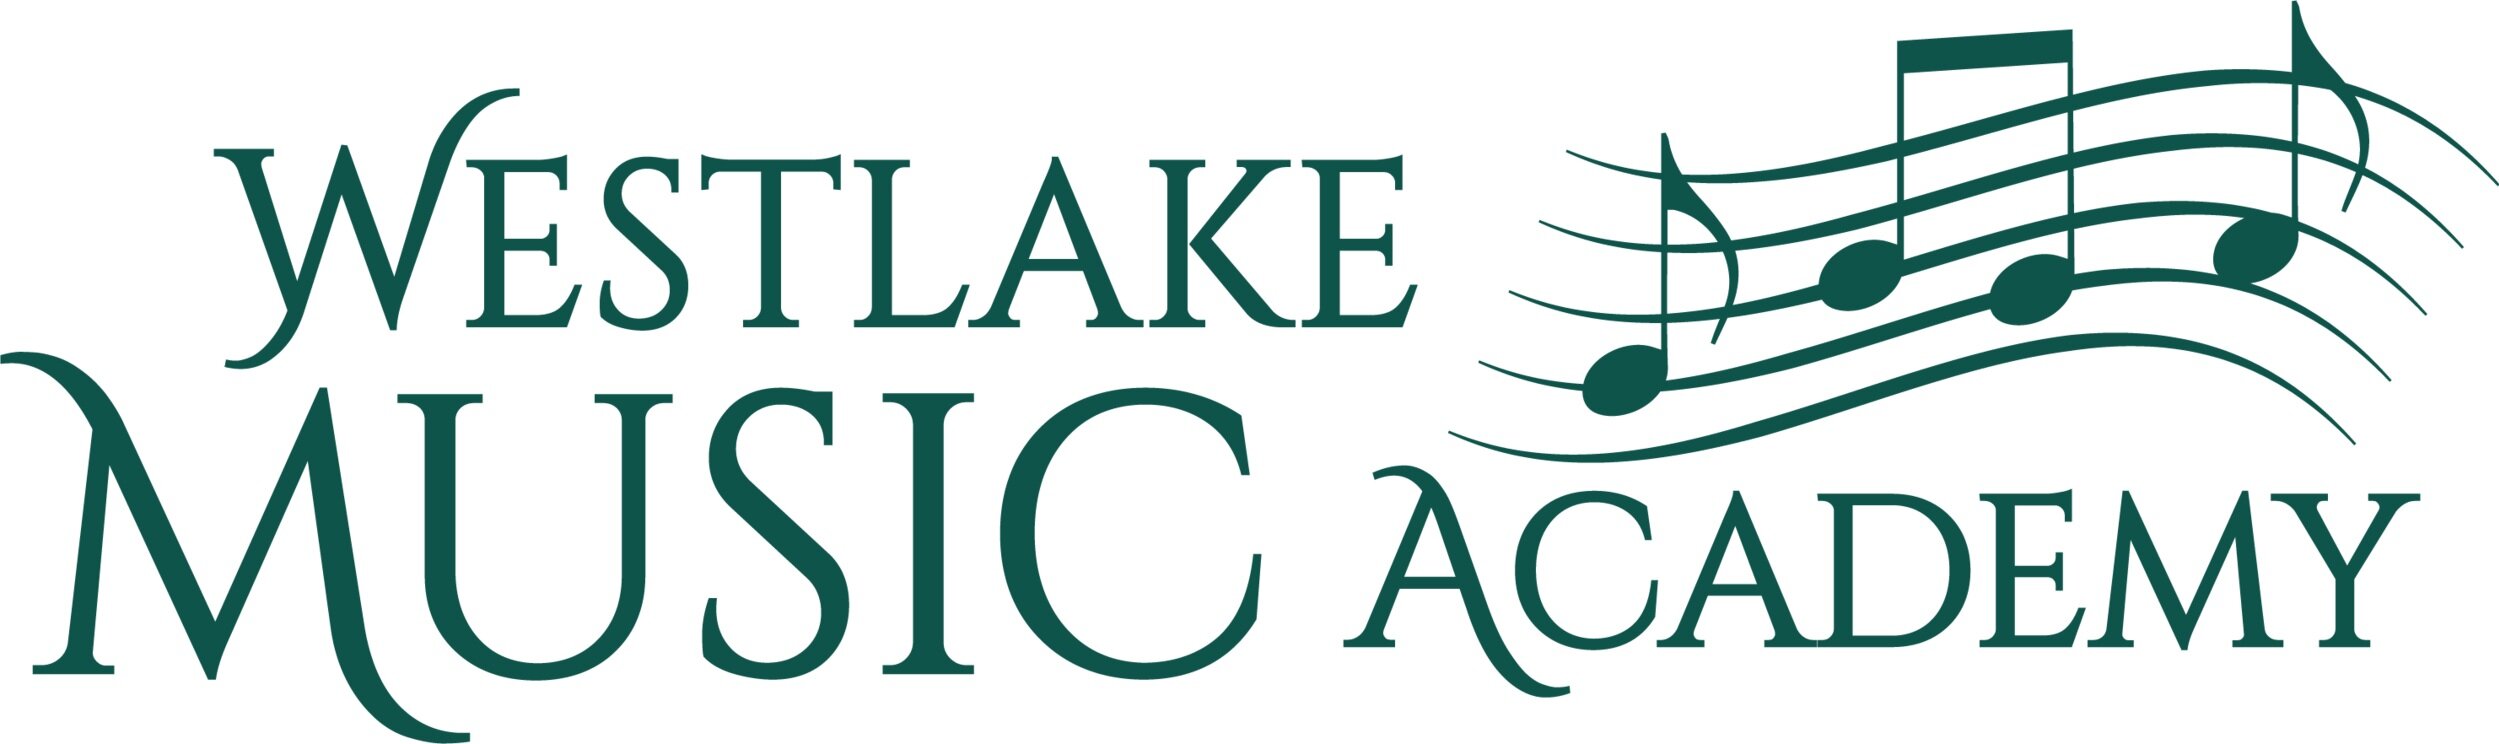 Westlake Music Academy: Music Lessons in Westlake, Bay Village &amp; Rocky River OH